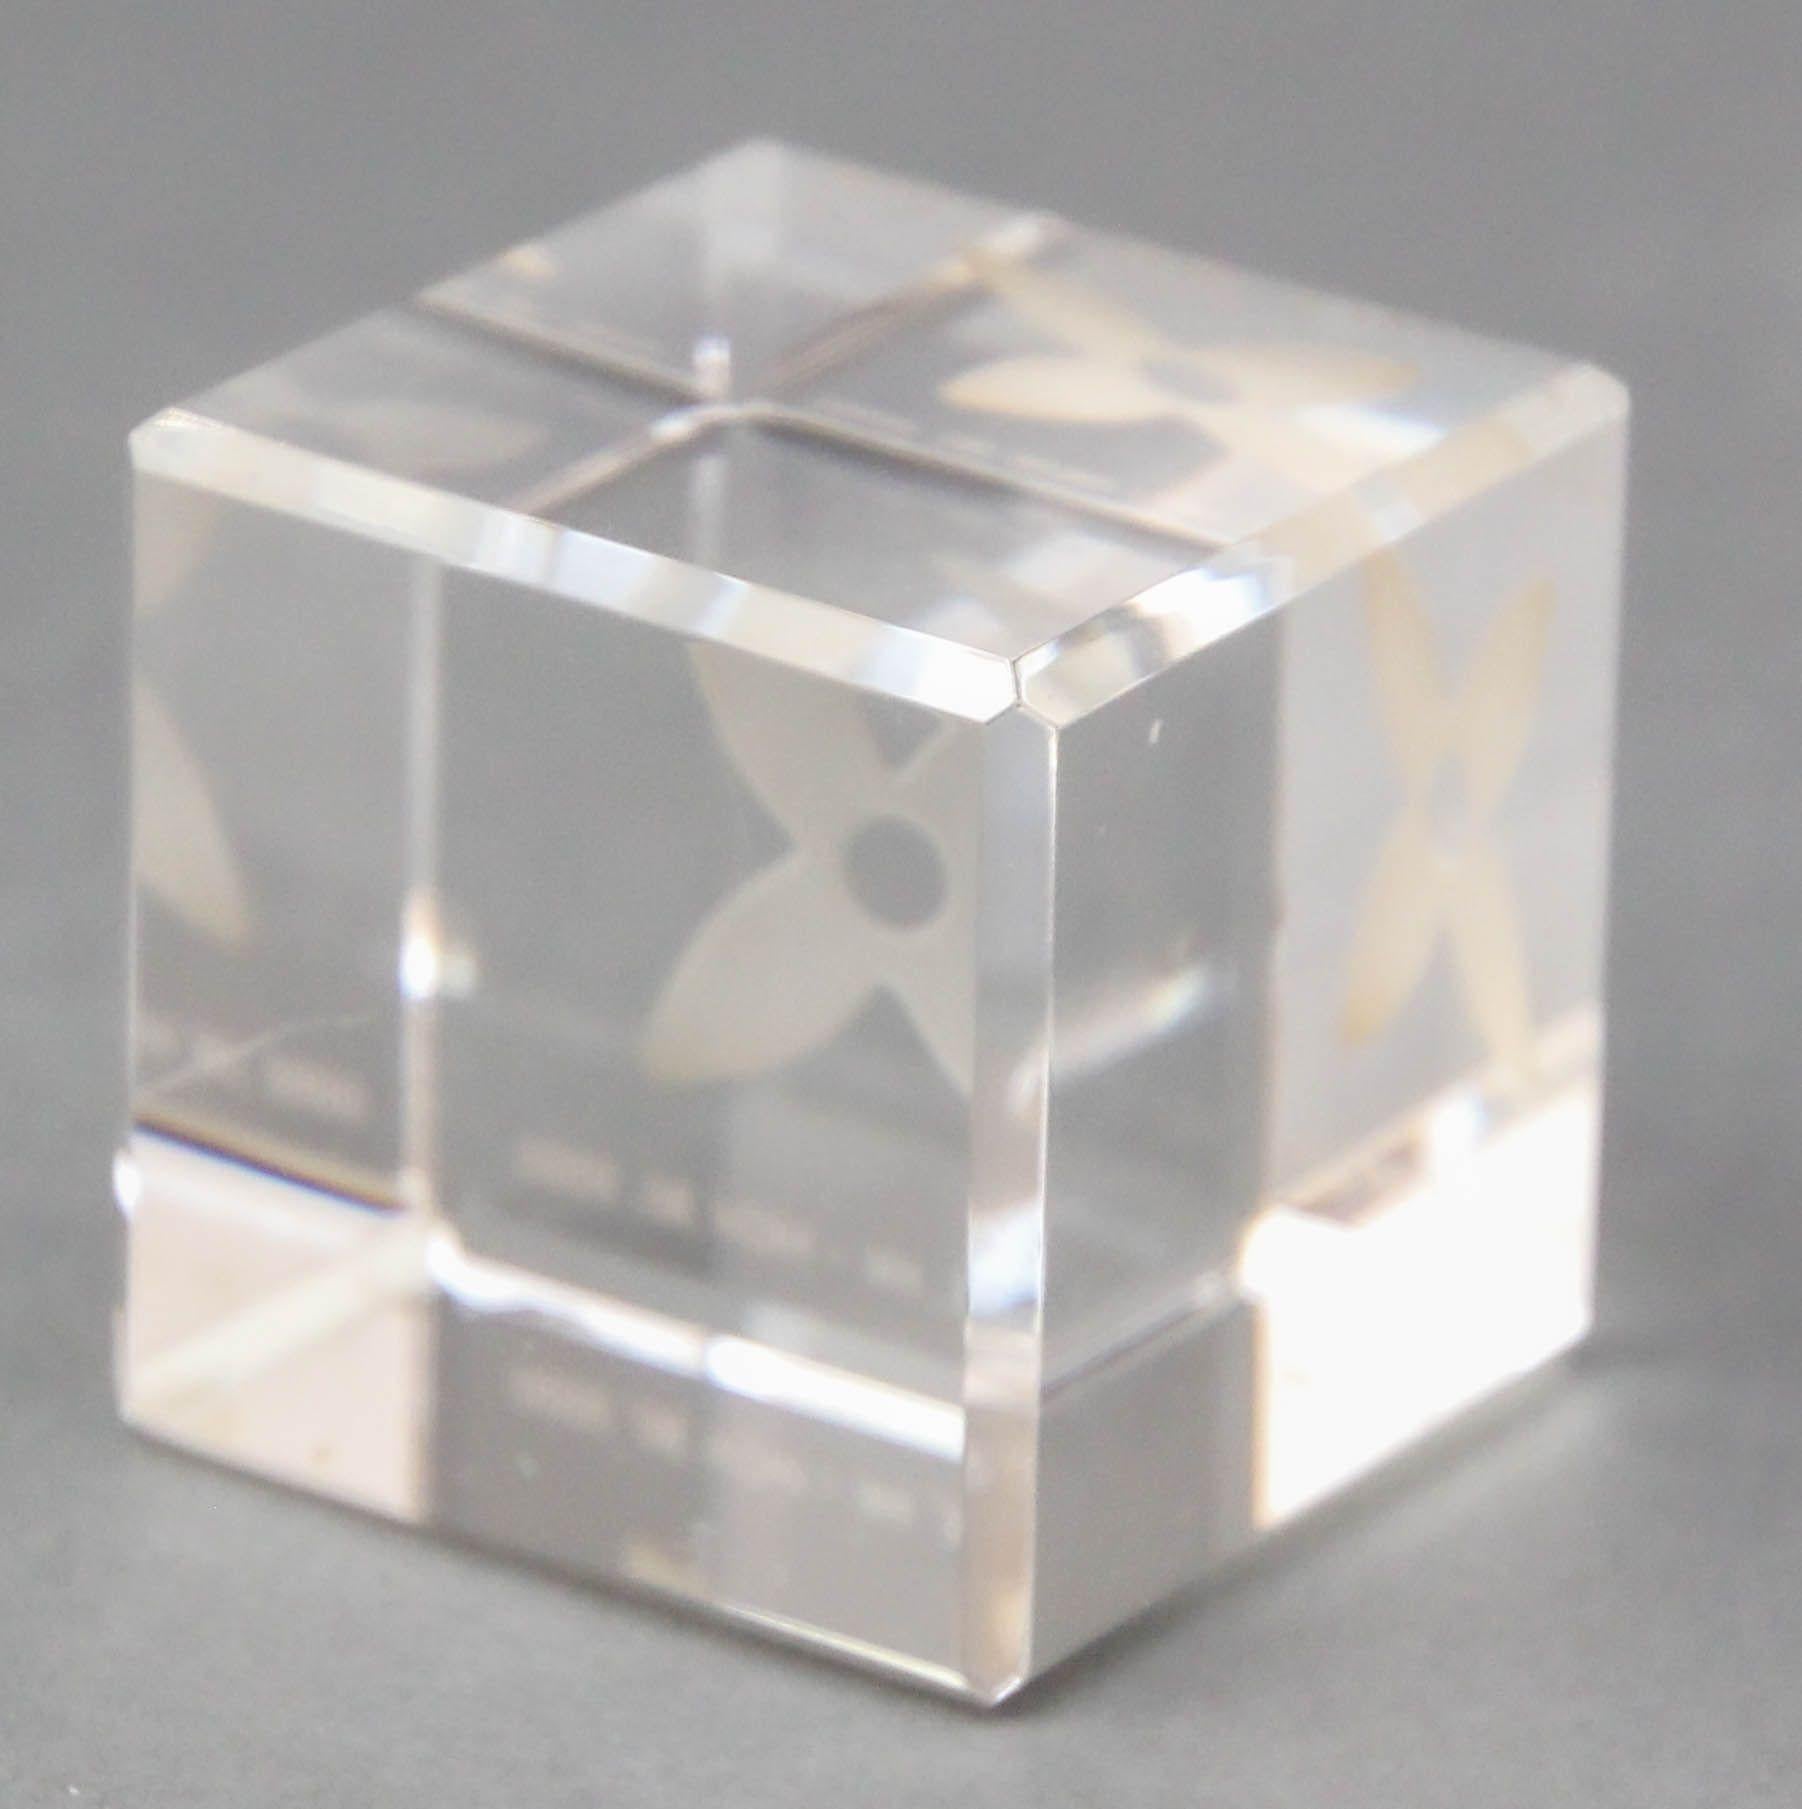 LOUIS VUITTON Cube Paperweight LOUIS VUITTON Monogram Crystal Paper Weight In Good Condition For Sale In North Hollywood, CA